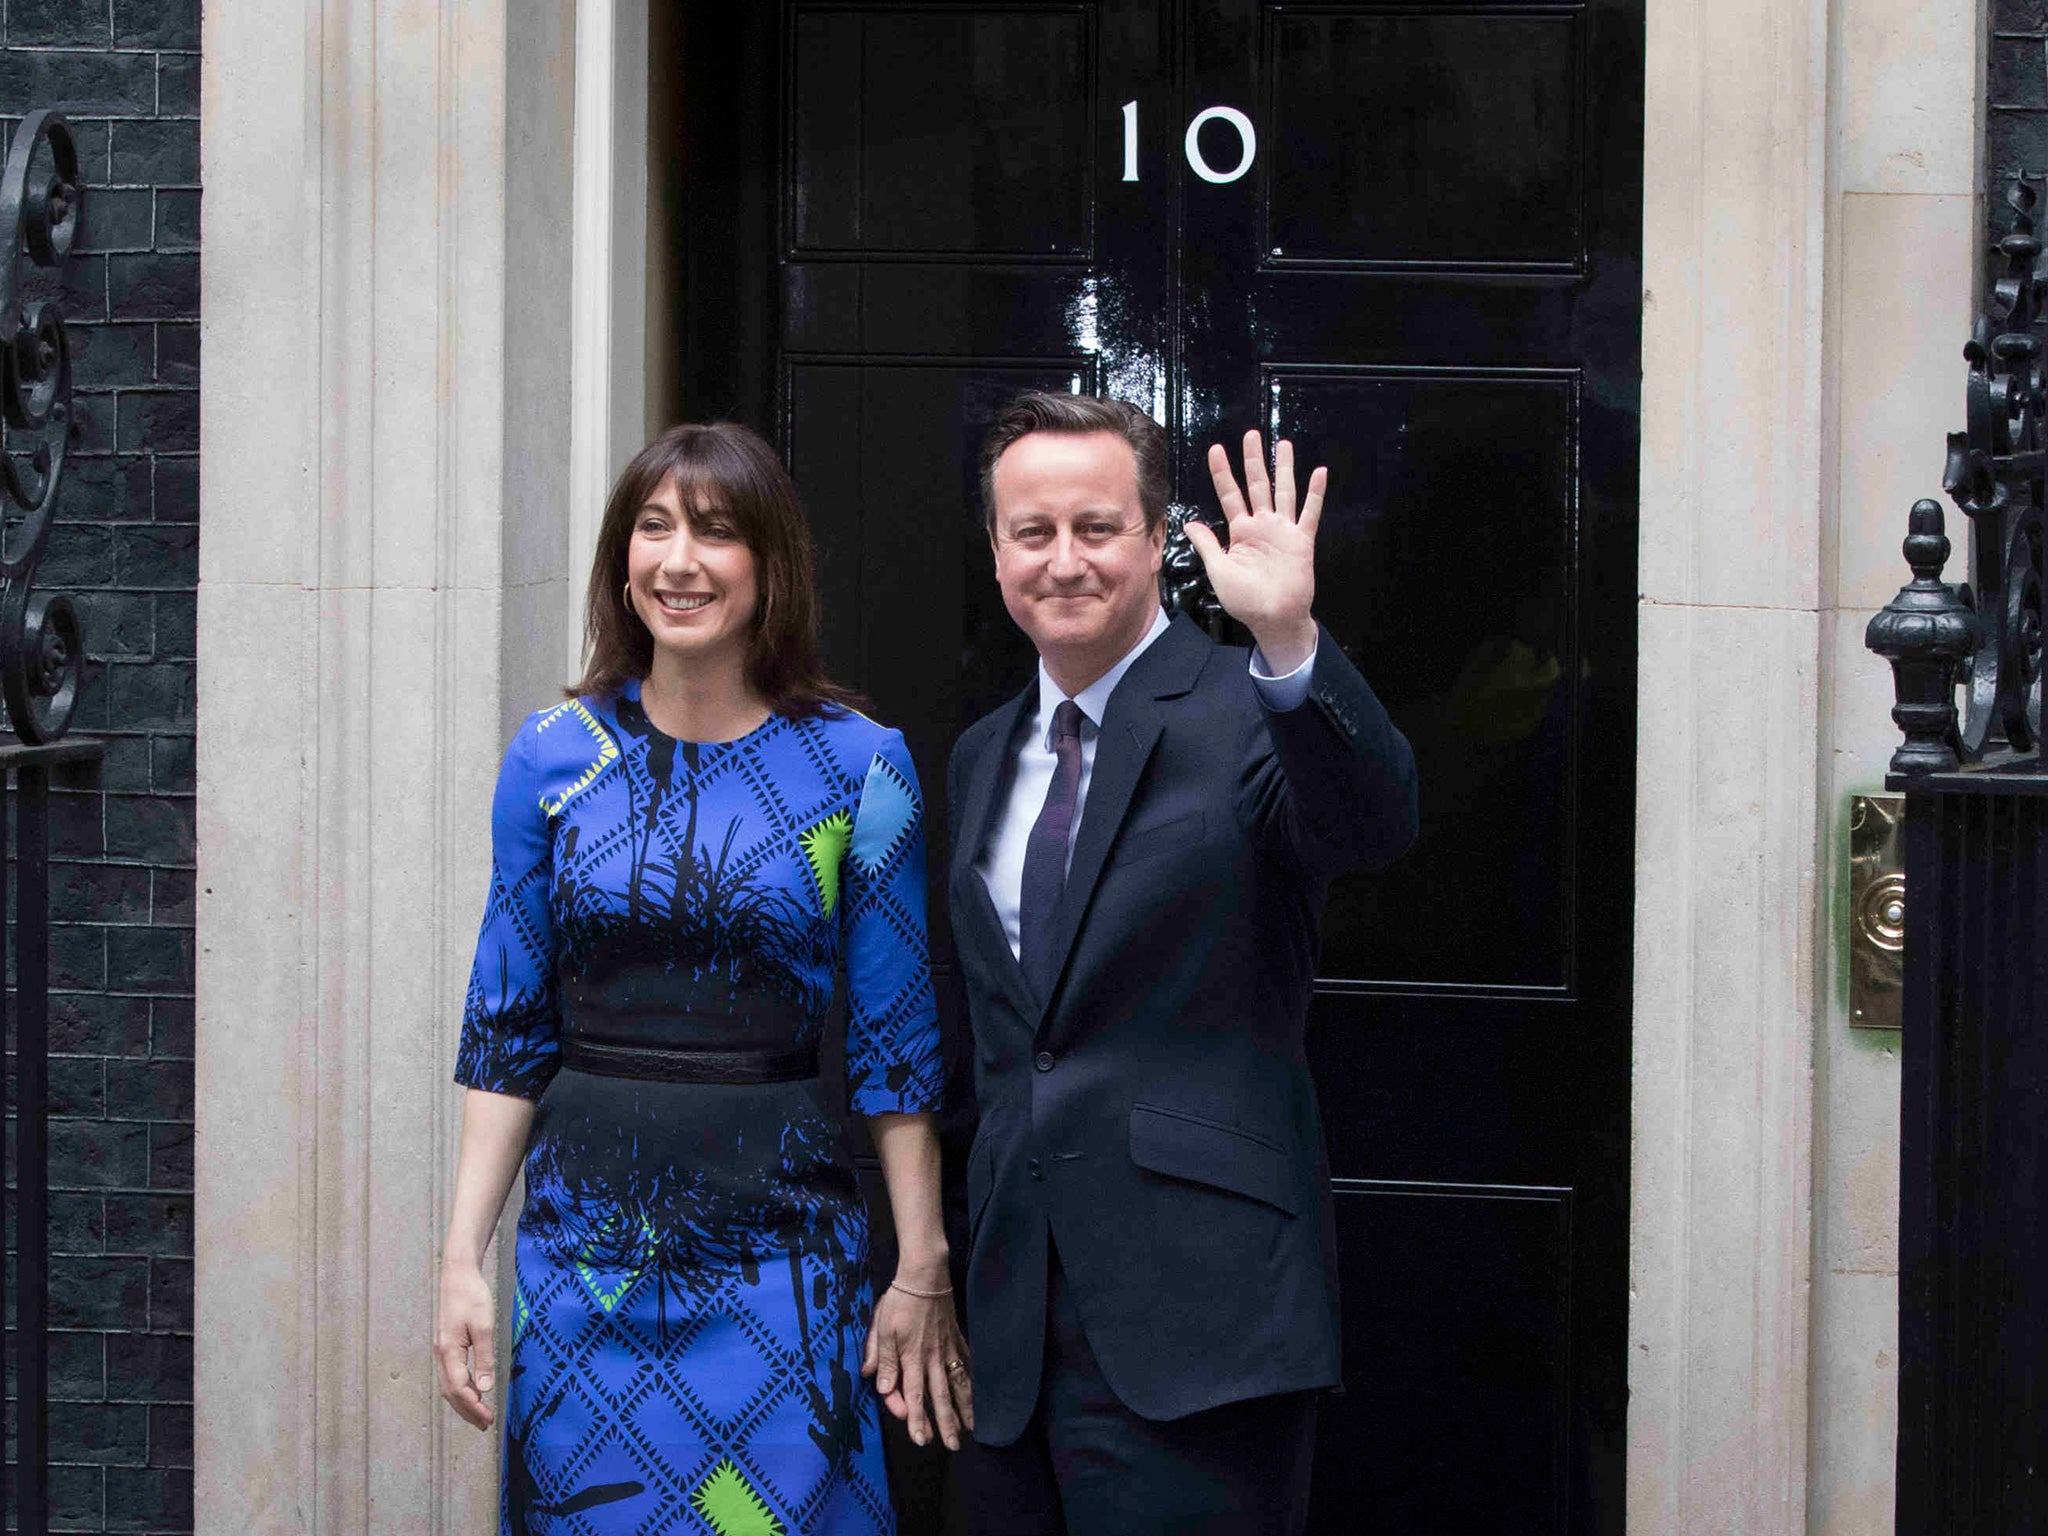 Cameron's Tories defied pollsters’ predictions of a hung parliament by winning an overall majority of 12